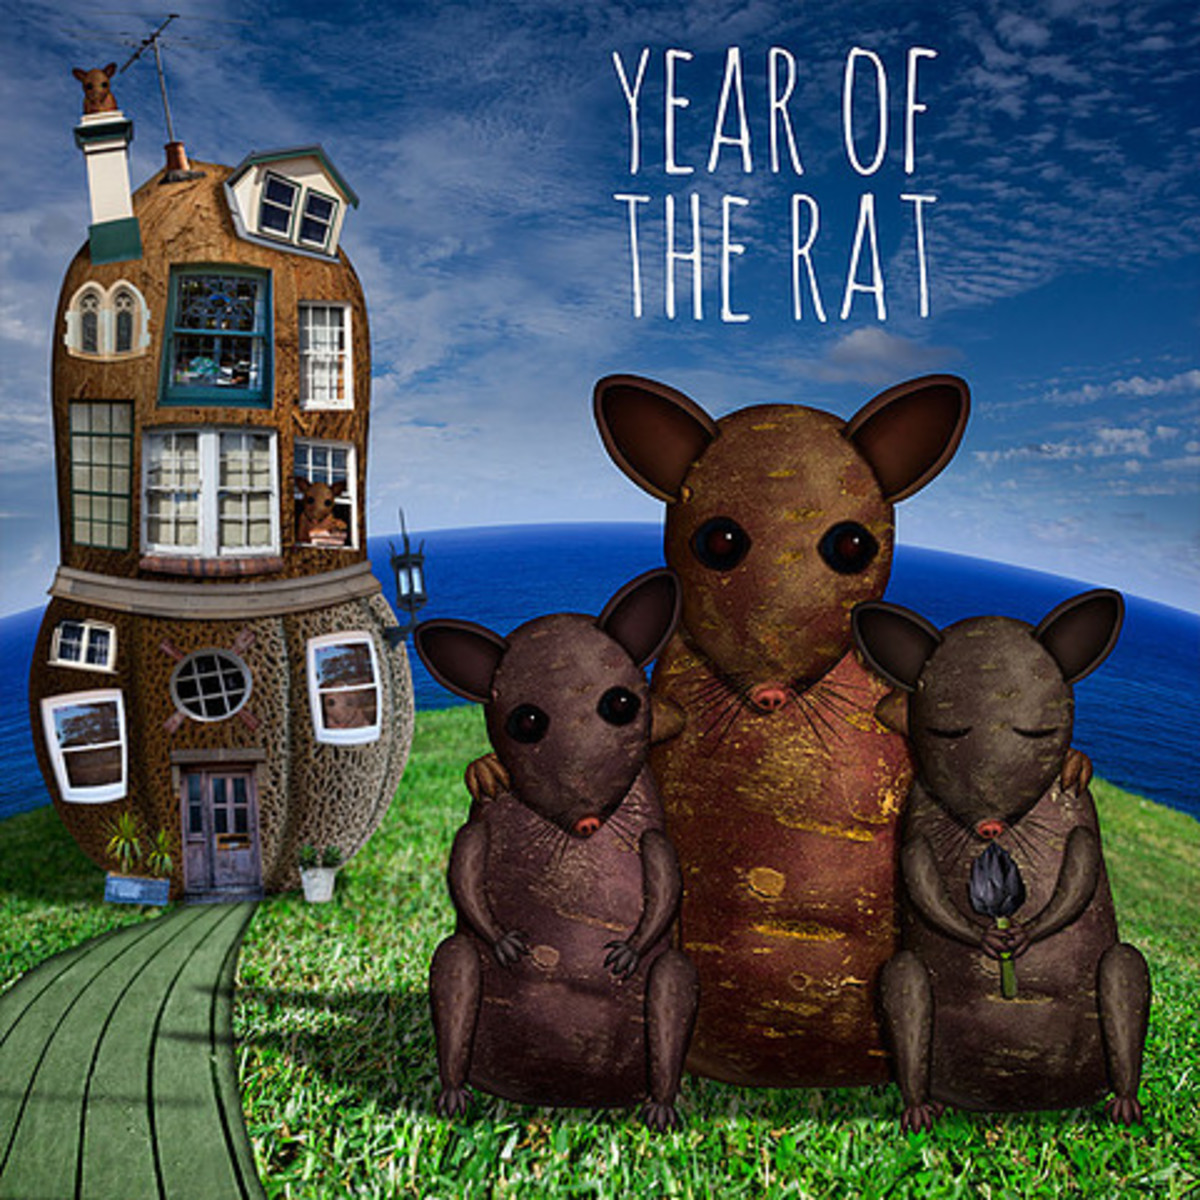 The Year of The Rat